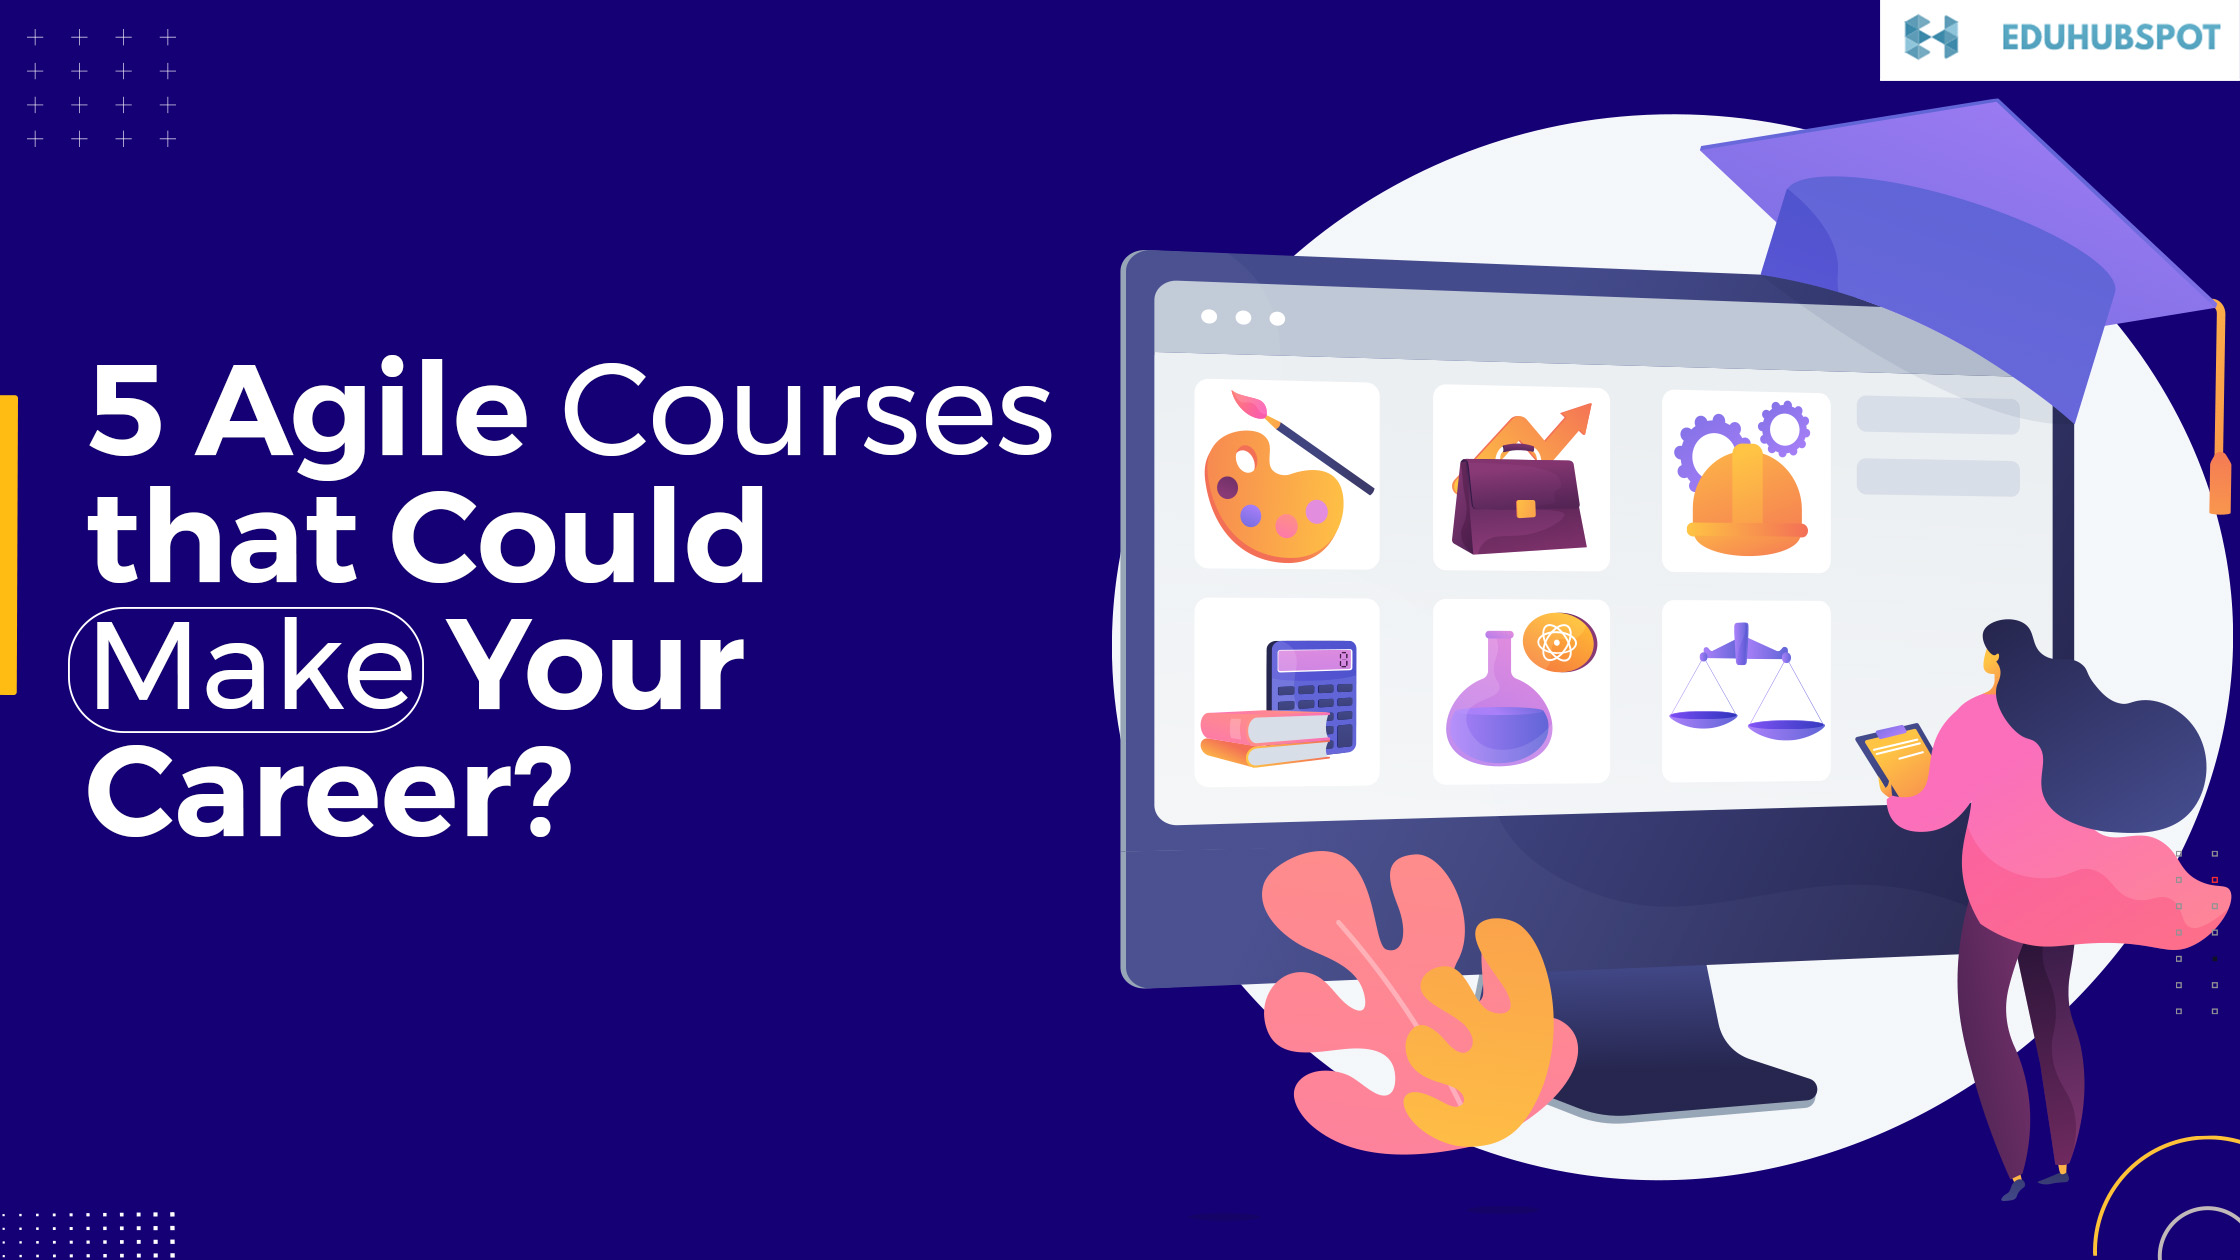 5 Agile Courses that Could Make Your Career